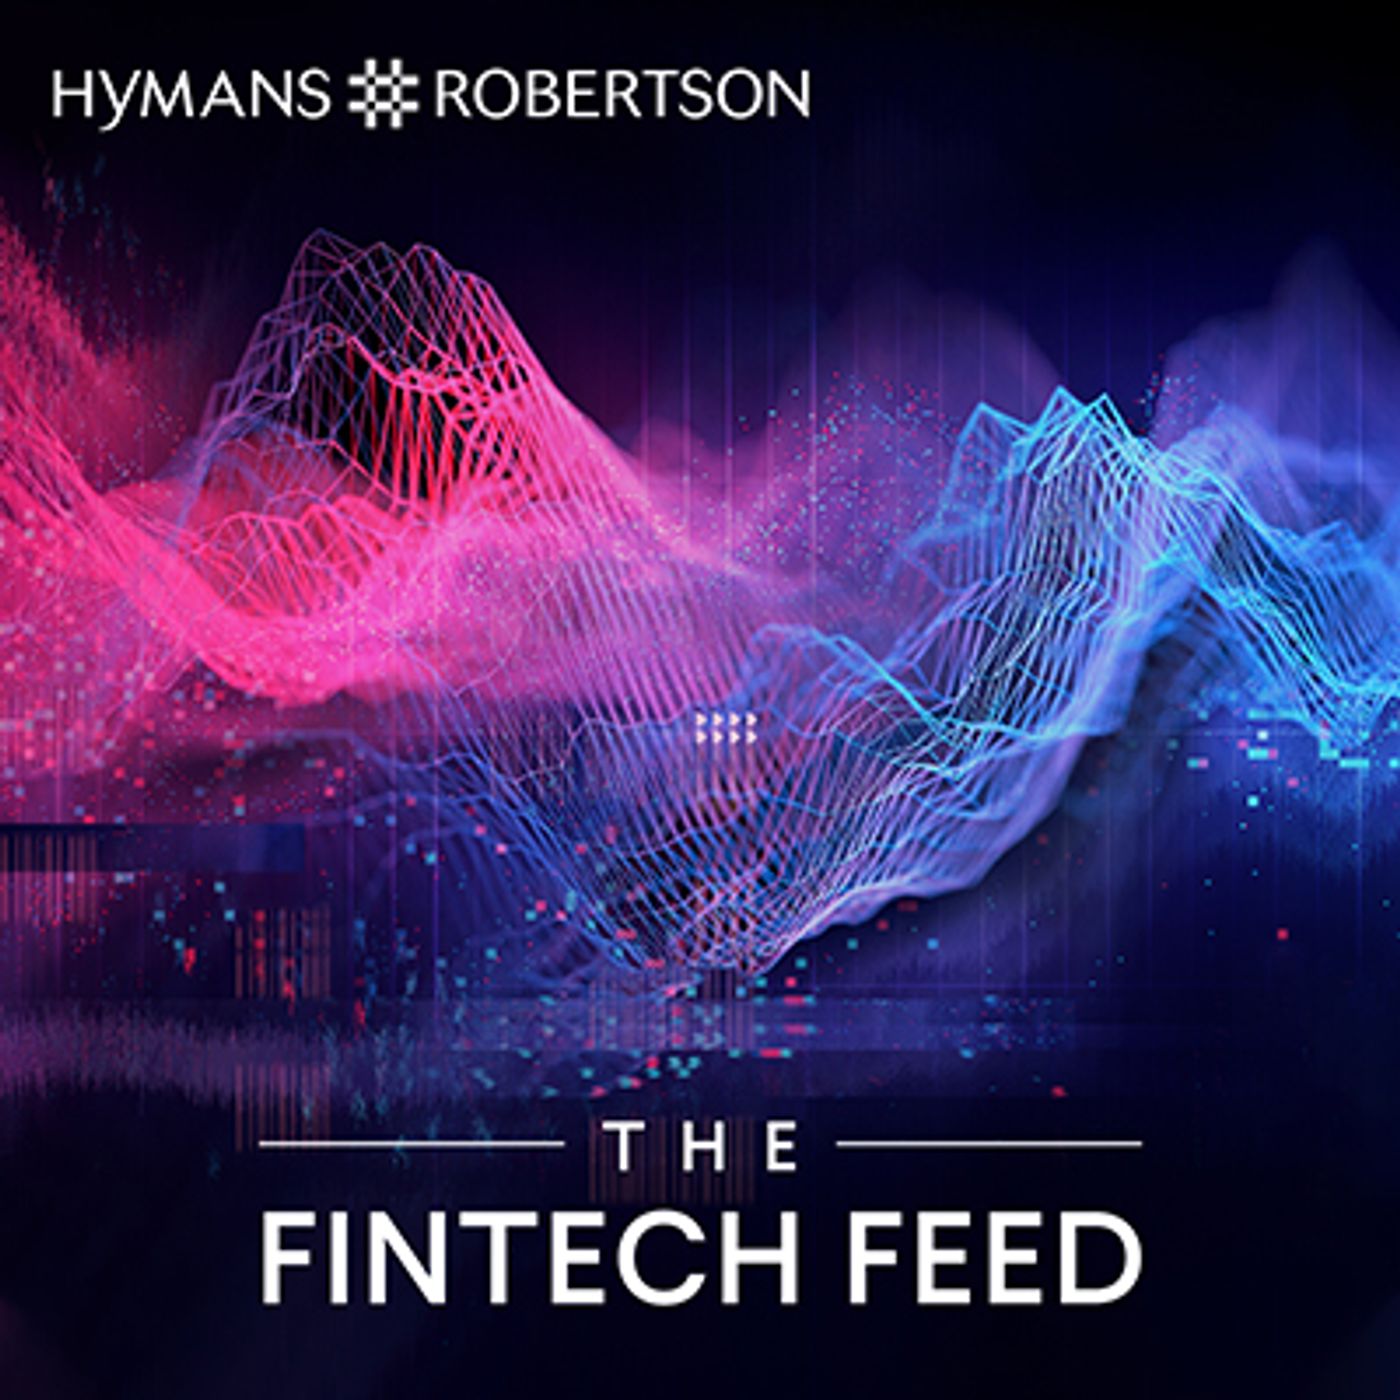 Fintech Feed - AI Ethics, Regulation and Opportunities. How to proceed